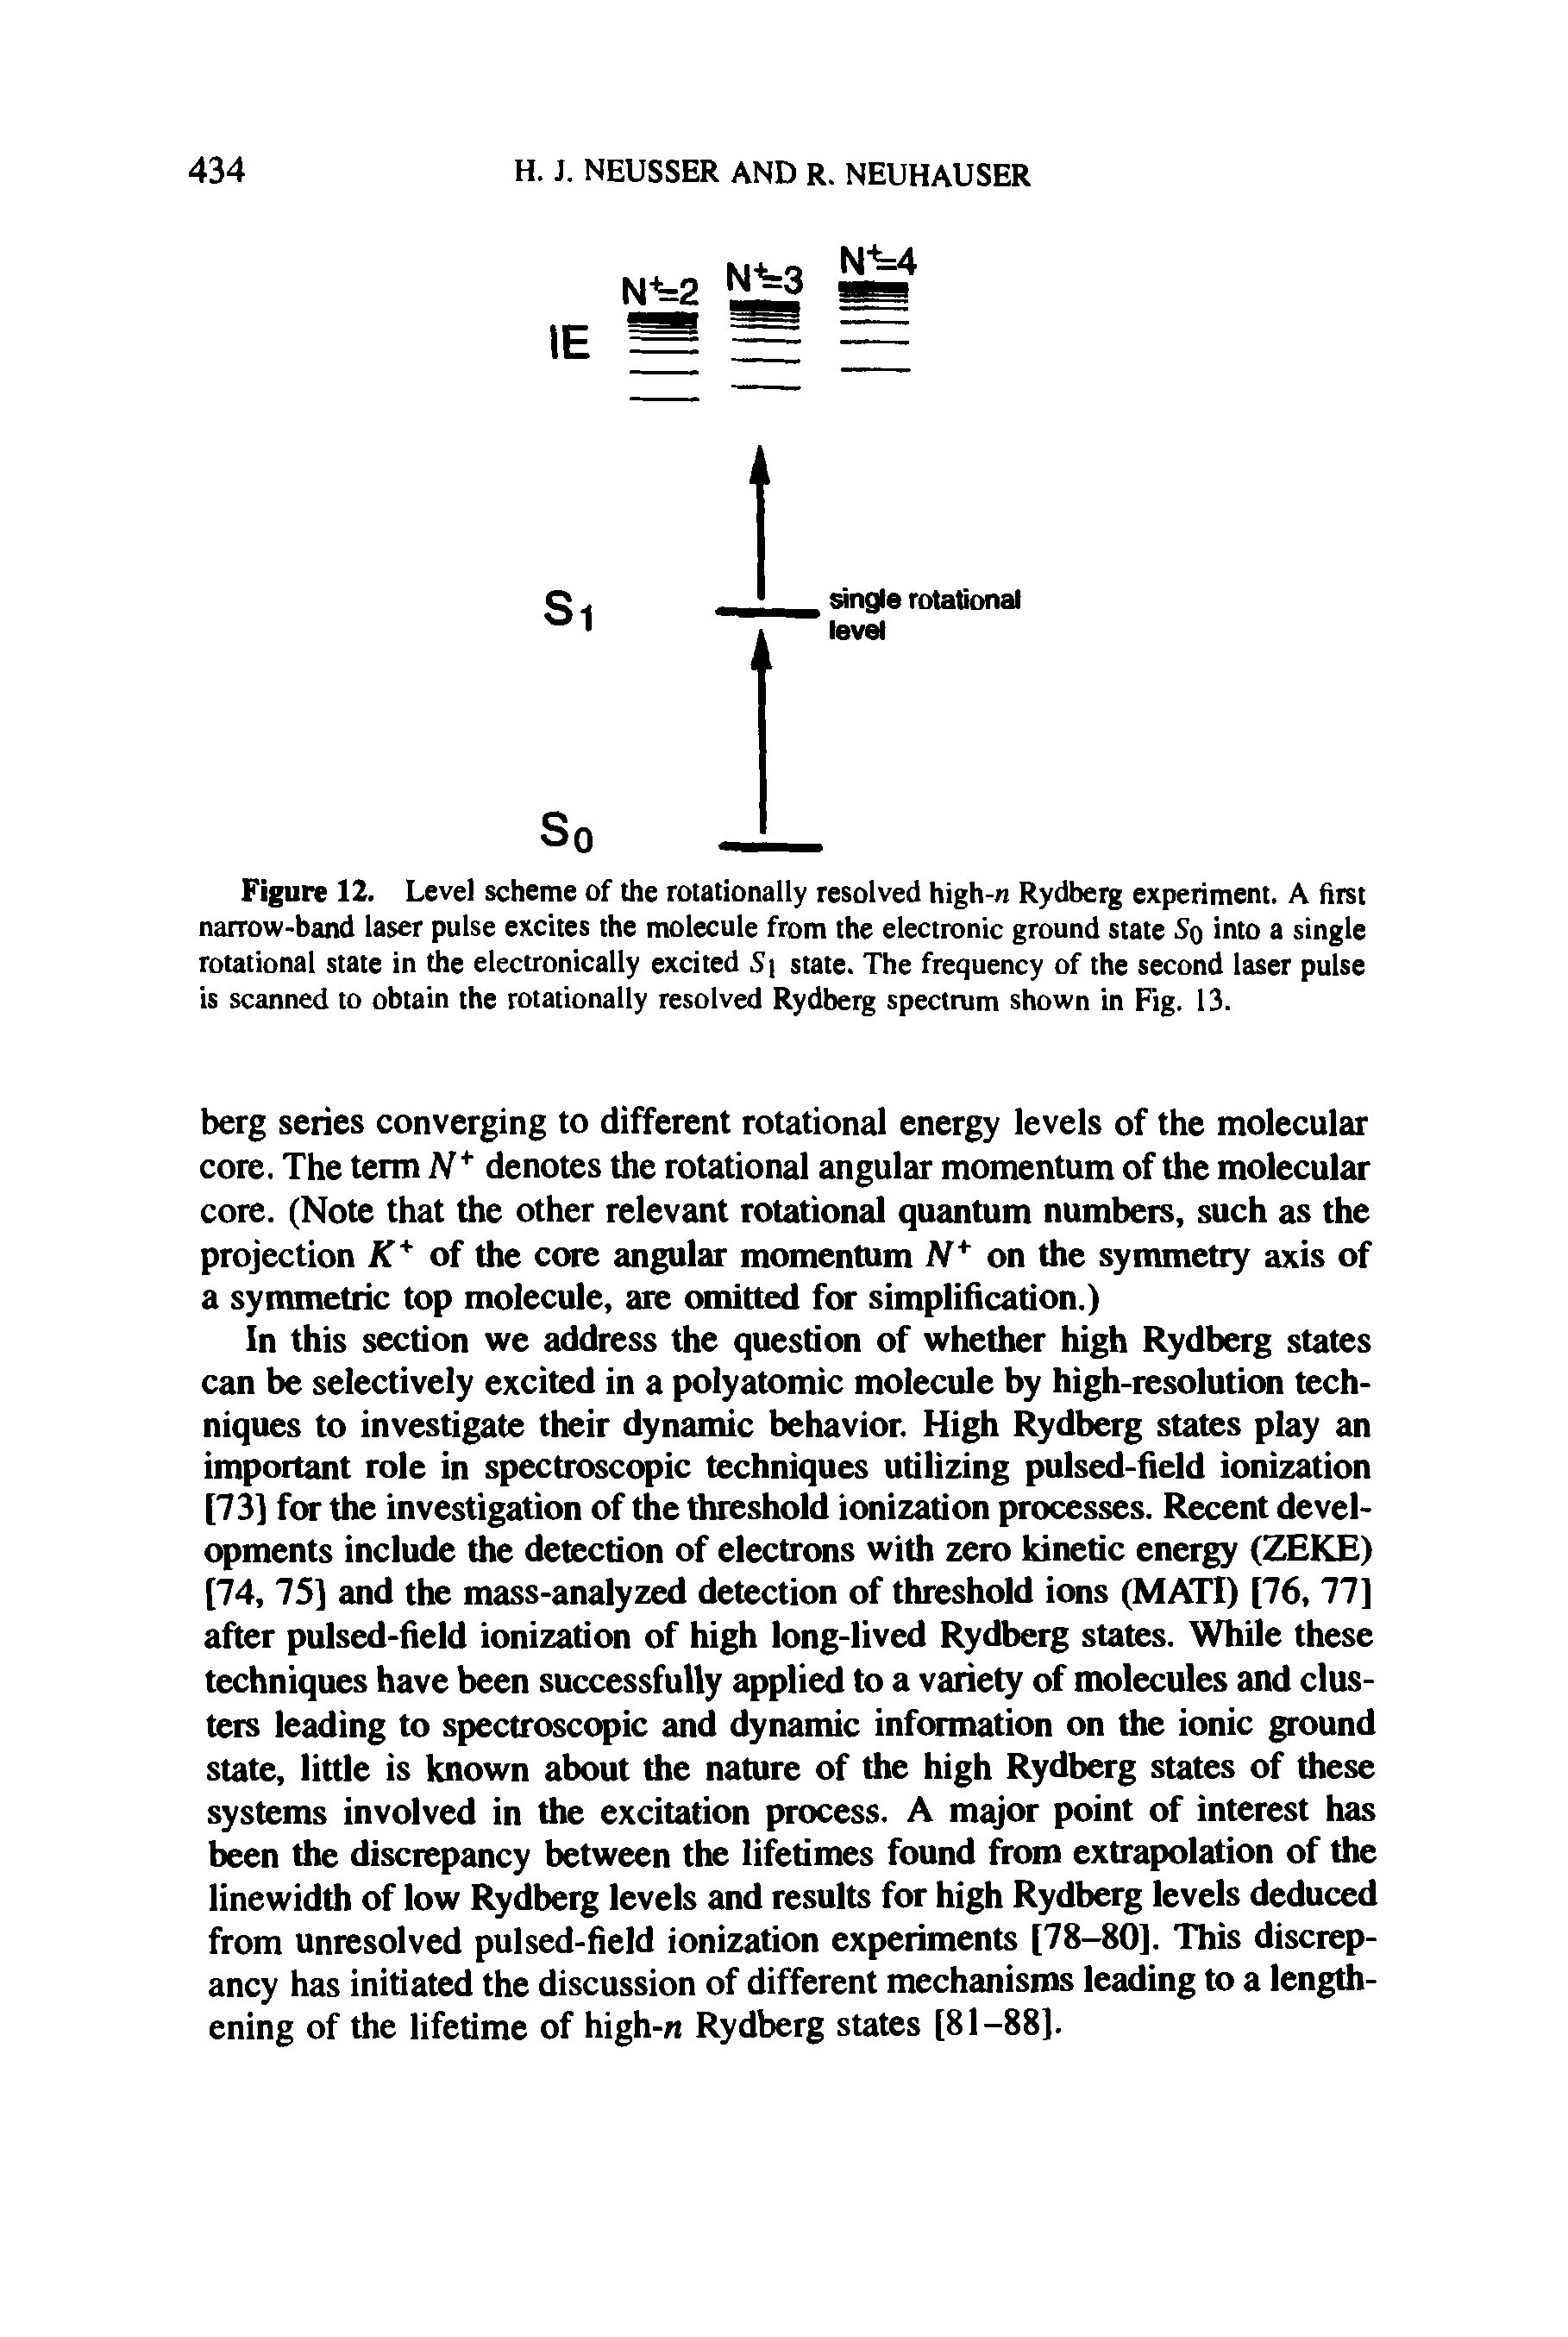 Figure 12. Level scheme of the rotationally resolved high-n Rydberg experiment. A first narrow-band laser pulse excites the molecule from the electronic ground state So into a single rotational state in the electronically excited S state. The frequency of the second laser pulse is scanned to obtain the rotationally resolved Rydberg spectrum shown in Fig. 13.